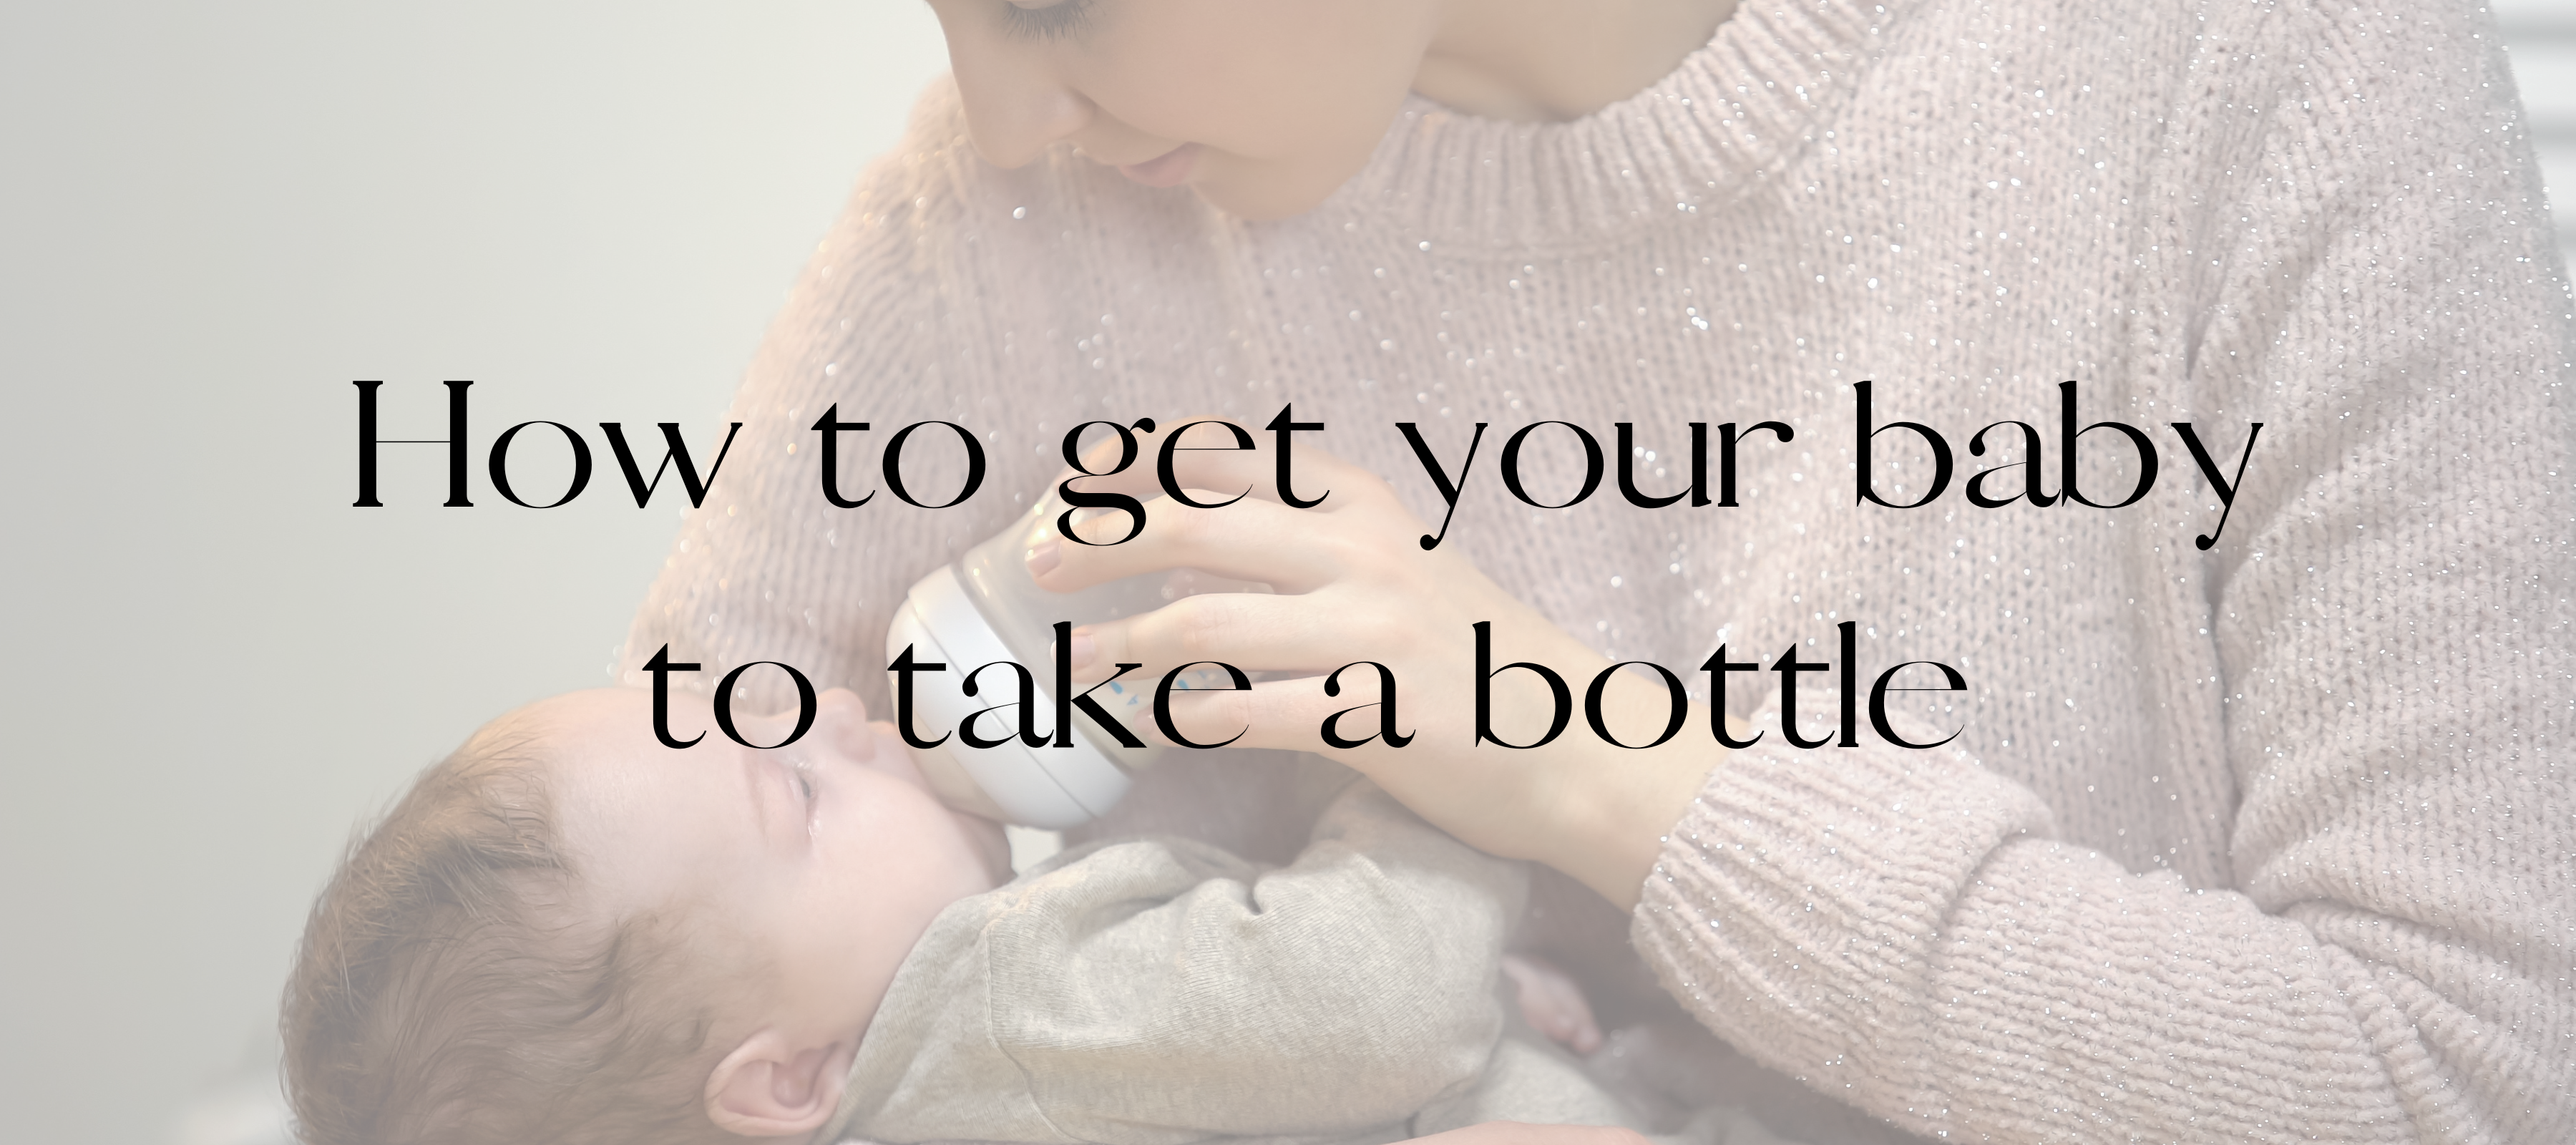 How to get your baby to take a bottle